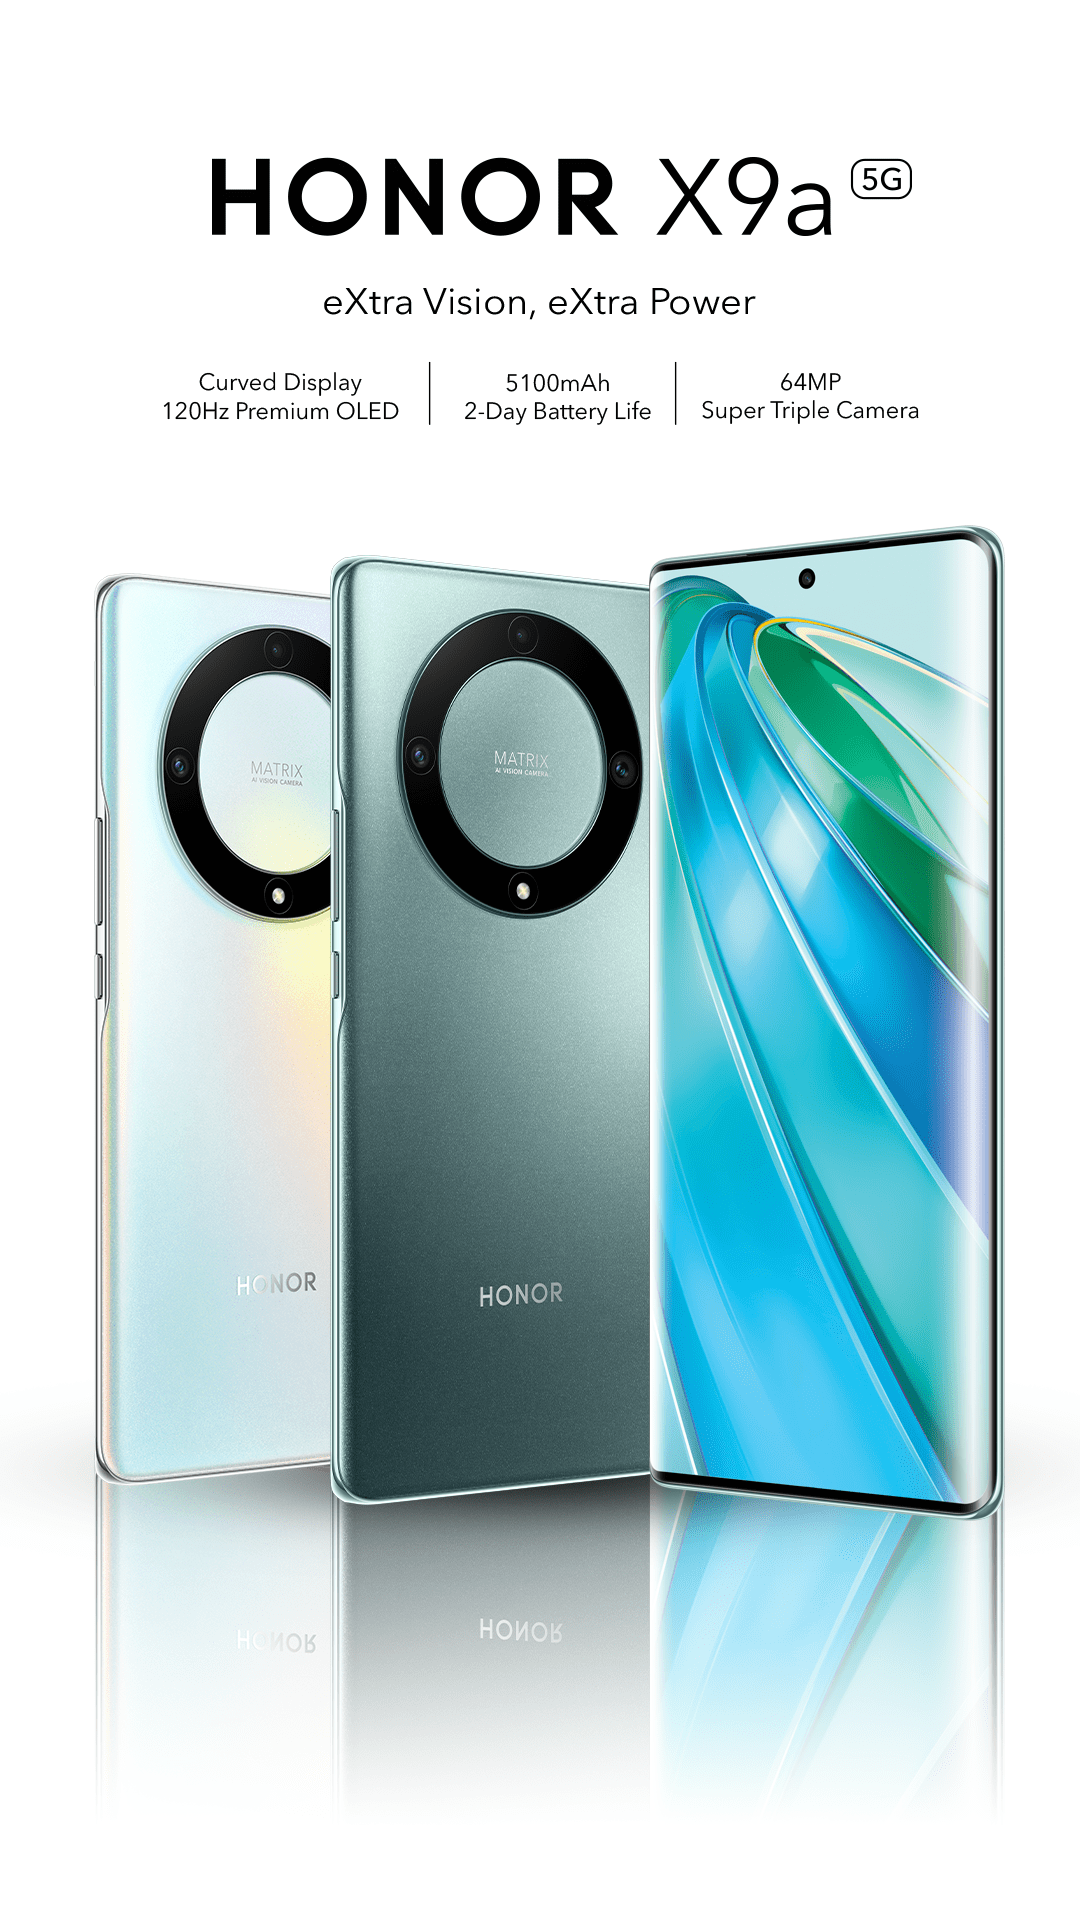 HONOR raises the bar for a superior display experience at an affordable price!